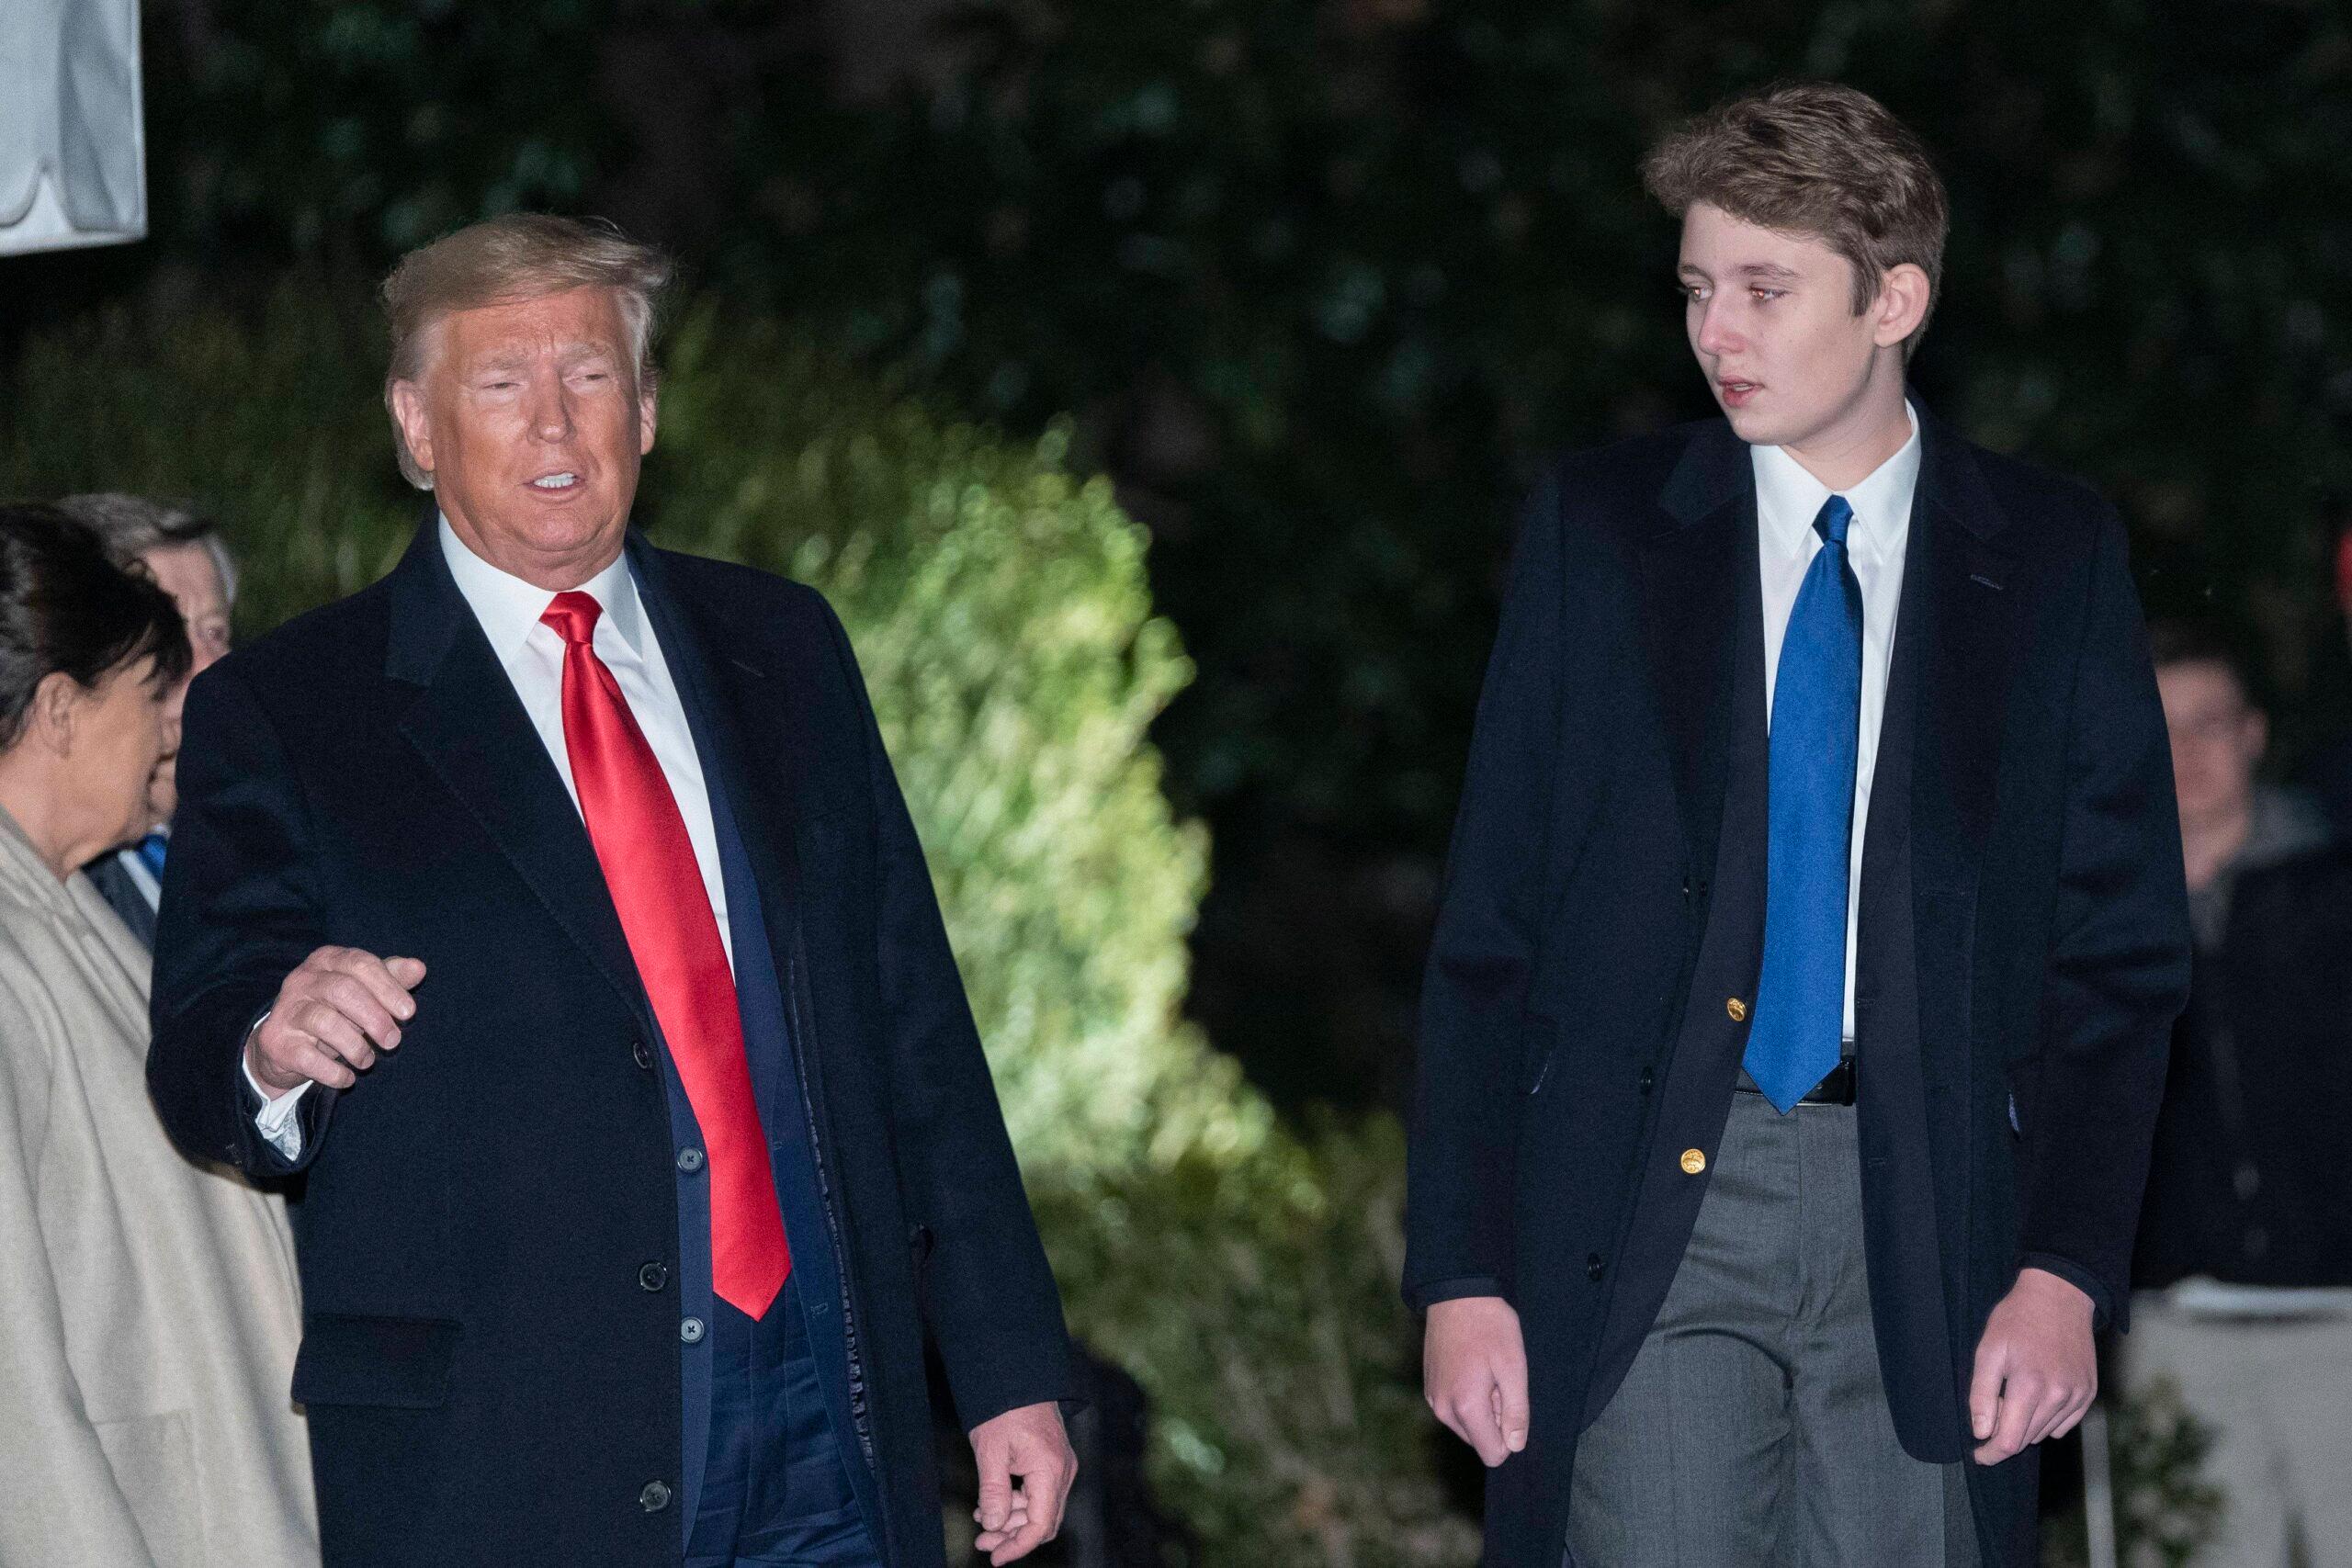 Donald Trump's Son Barron Begins Political Journey At 18 As Florida Delegate At GOP Convention